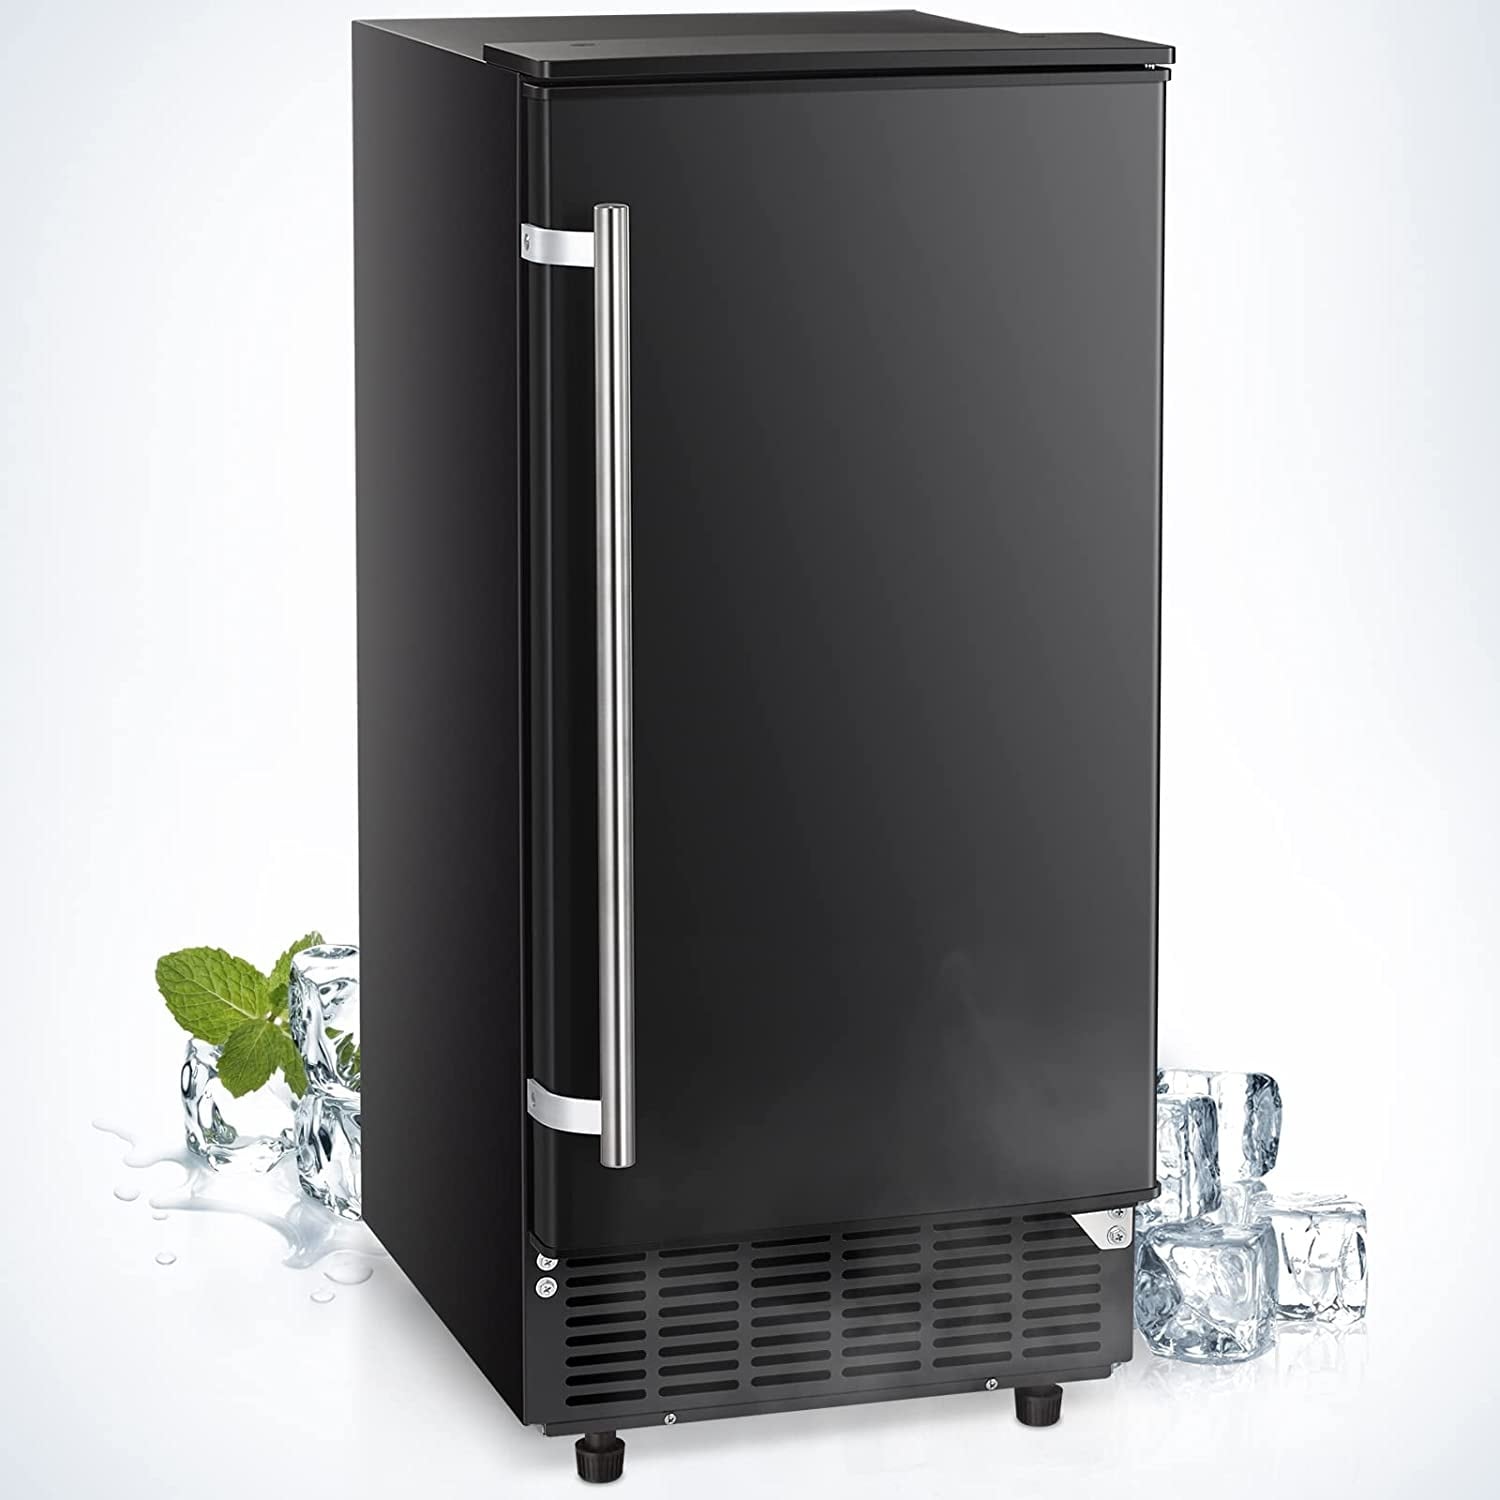 https://ak1.ostkcdn.com/images/products/is/images/direct/f5ddc2f4a73c0c1929ffe36a5f99426ac4a8153a/Ice-maker-for-home-office-use%2C-Commercial-lab-ice-maker%2C-80-lbs-per-day%2C-Reversible-door.jpg